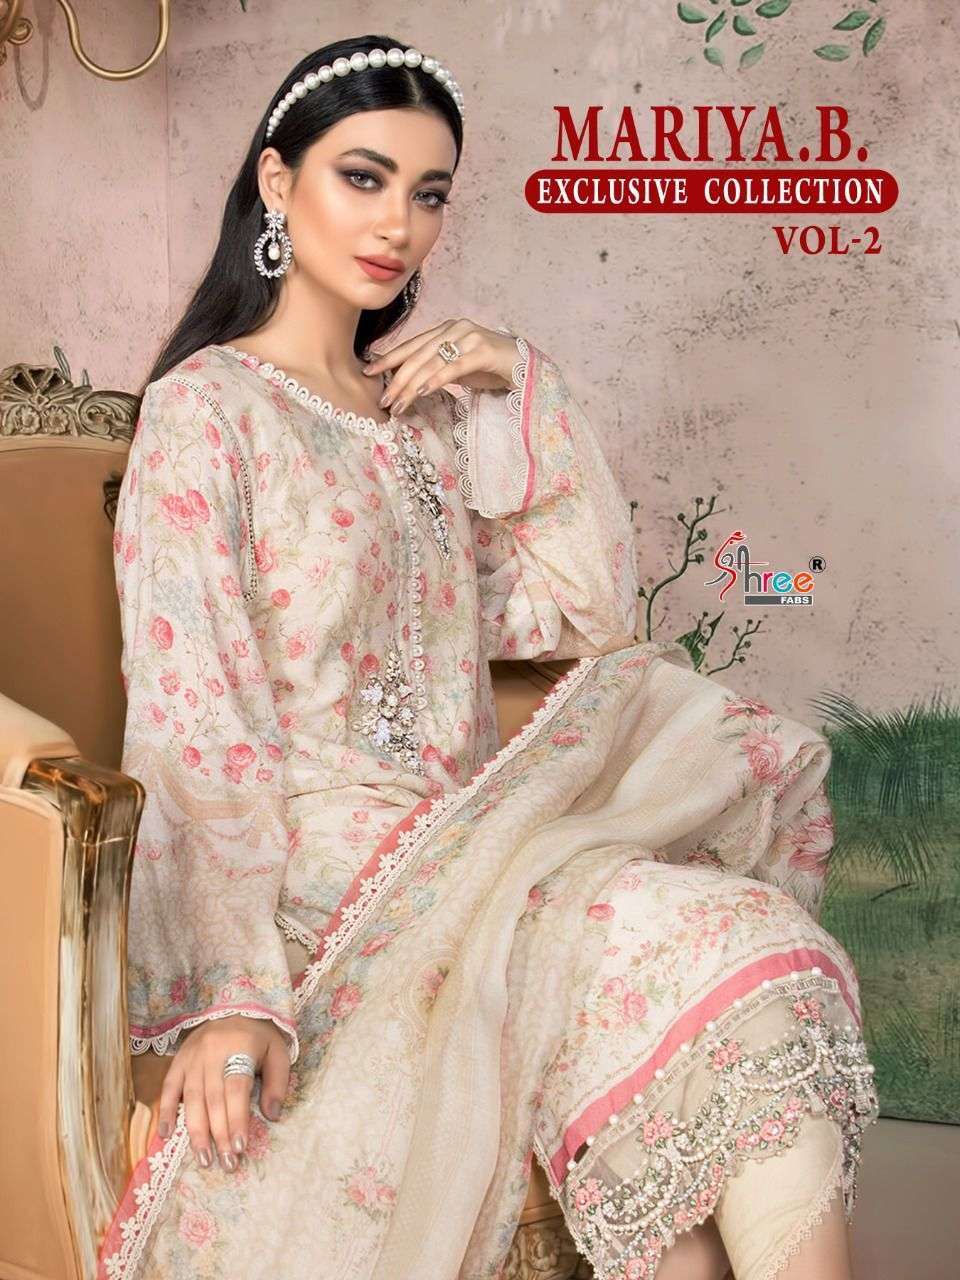 Shree fabs maria b exclusive vol 2 printed pure cotton with patch embroidery work pakistani dress material at wholesale Rate 